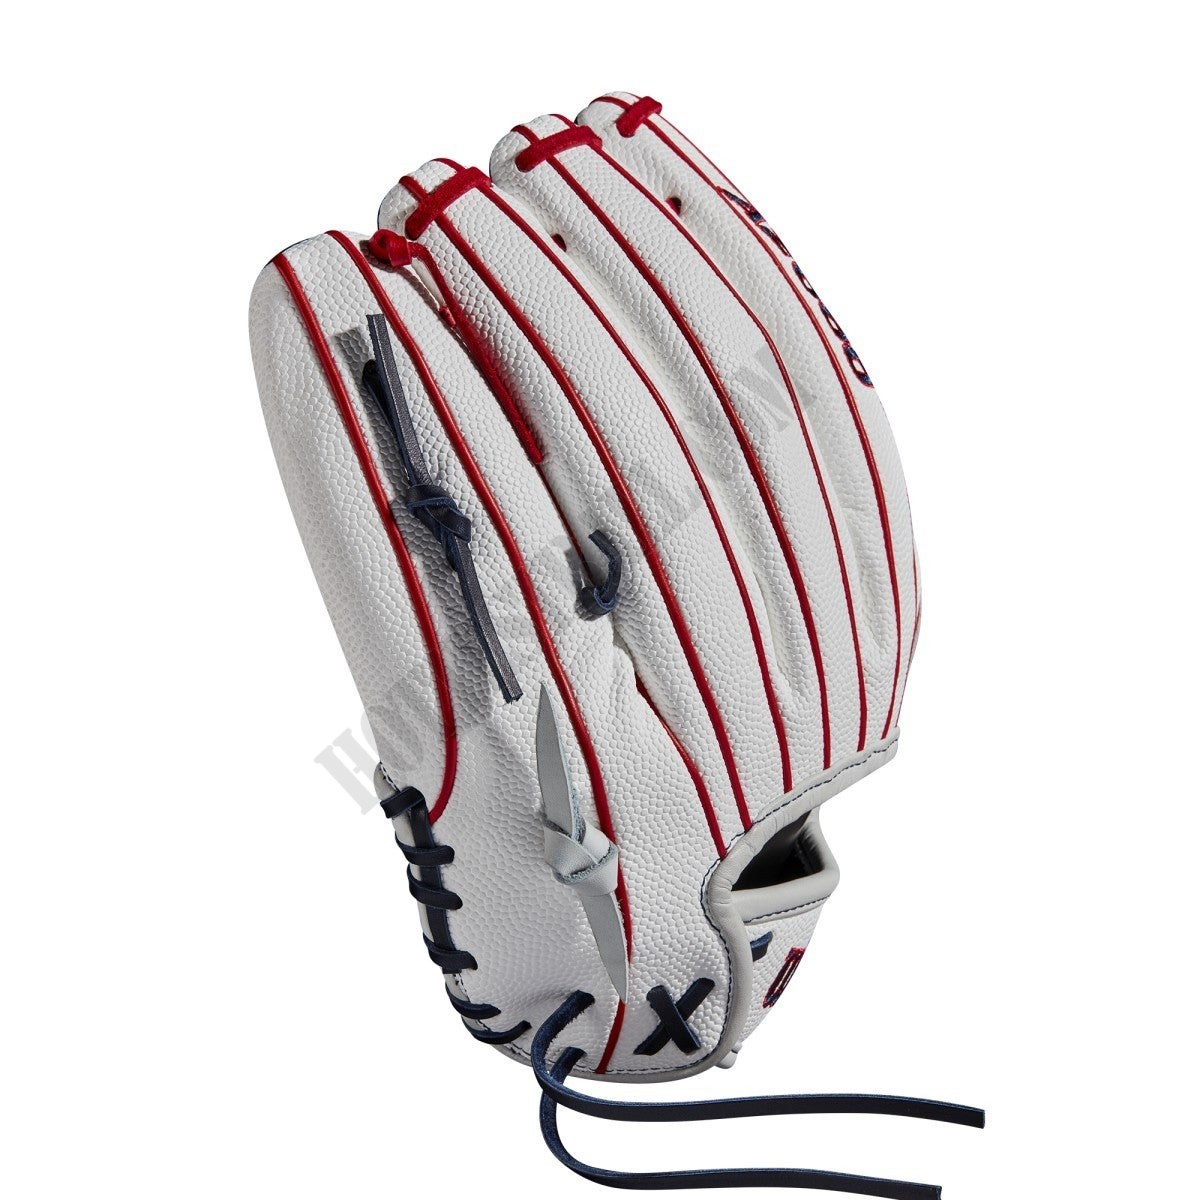 2021 A2000 MA14 GM 12.25" Pitcher's Fastpitch Glove ● Wilson Promotions - -4